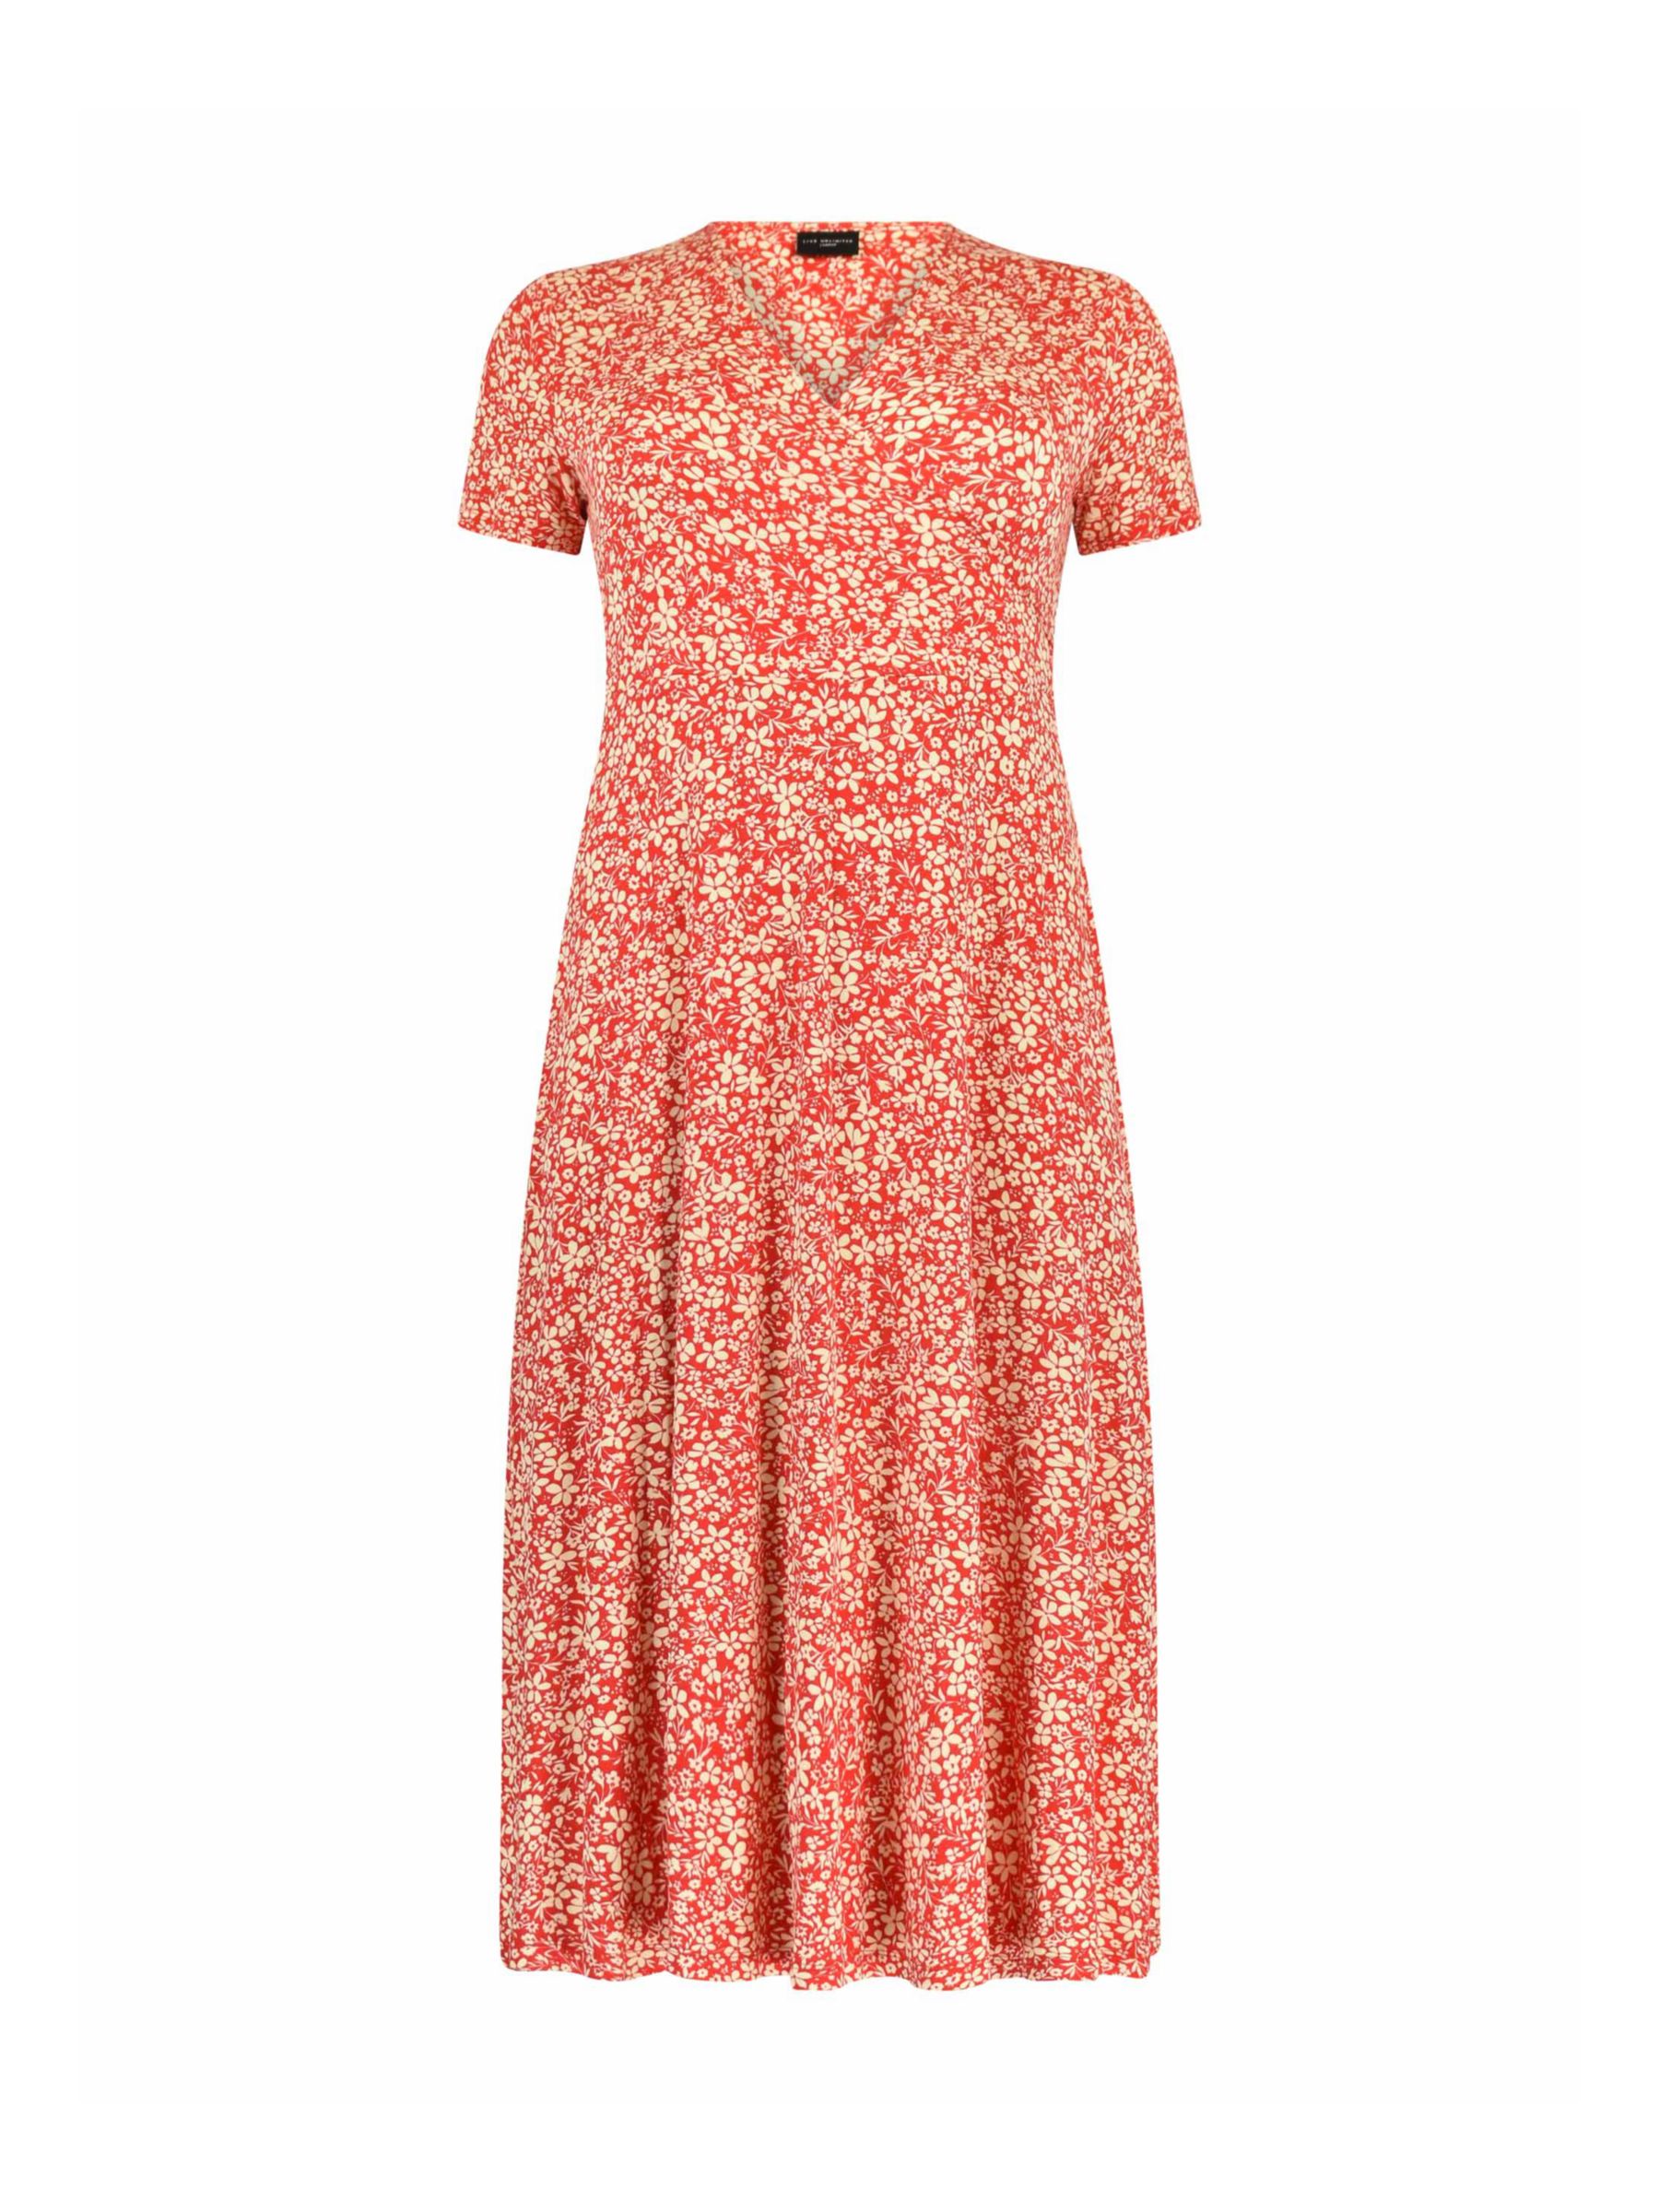 Live Unlimited Ditsy Print Midi Dress, Red/White at John Lewis & Partners